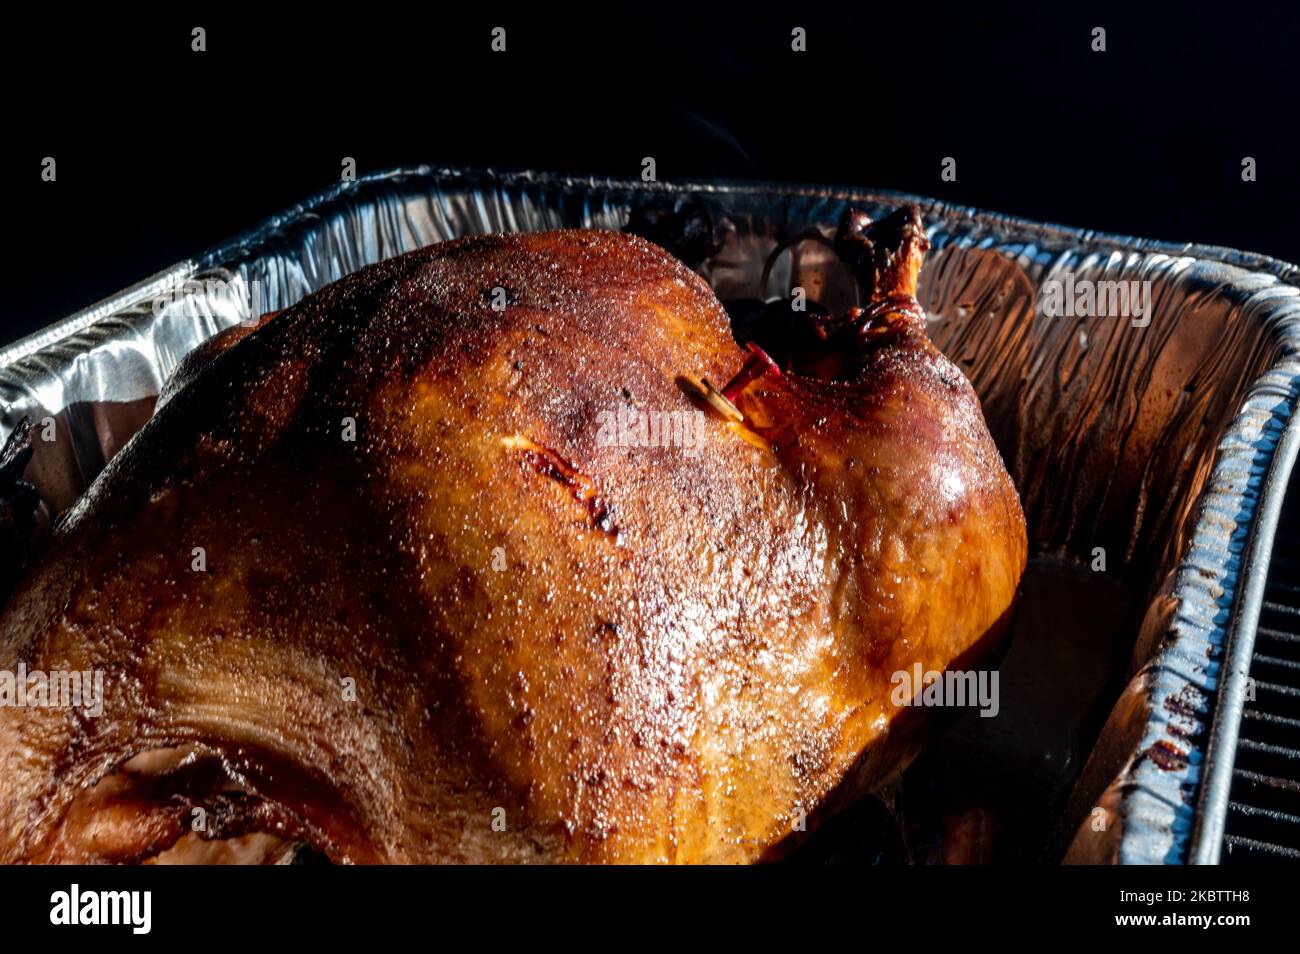 https://c8.alamy.com/comp/2KBTTH8/pop-up-thermometer-timer-in-a-smoked-turkey-2KBTTH8.jpg